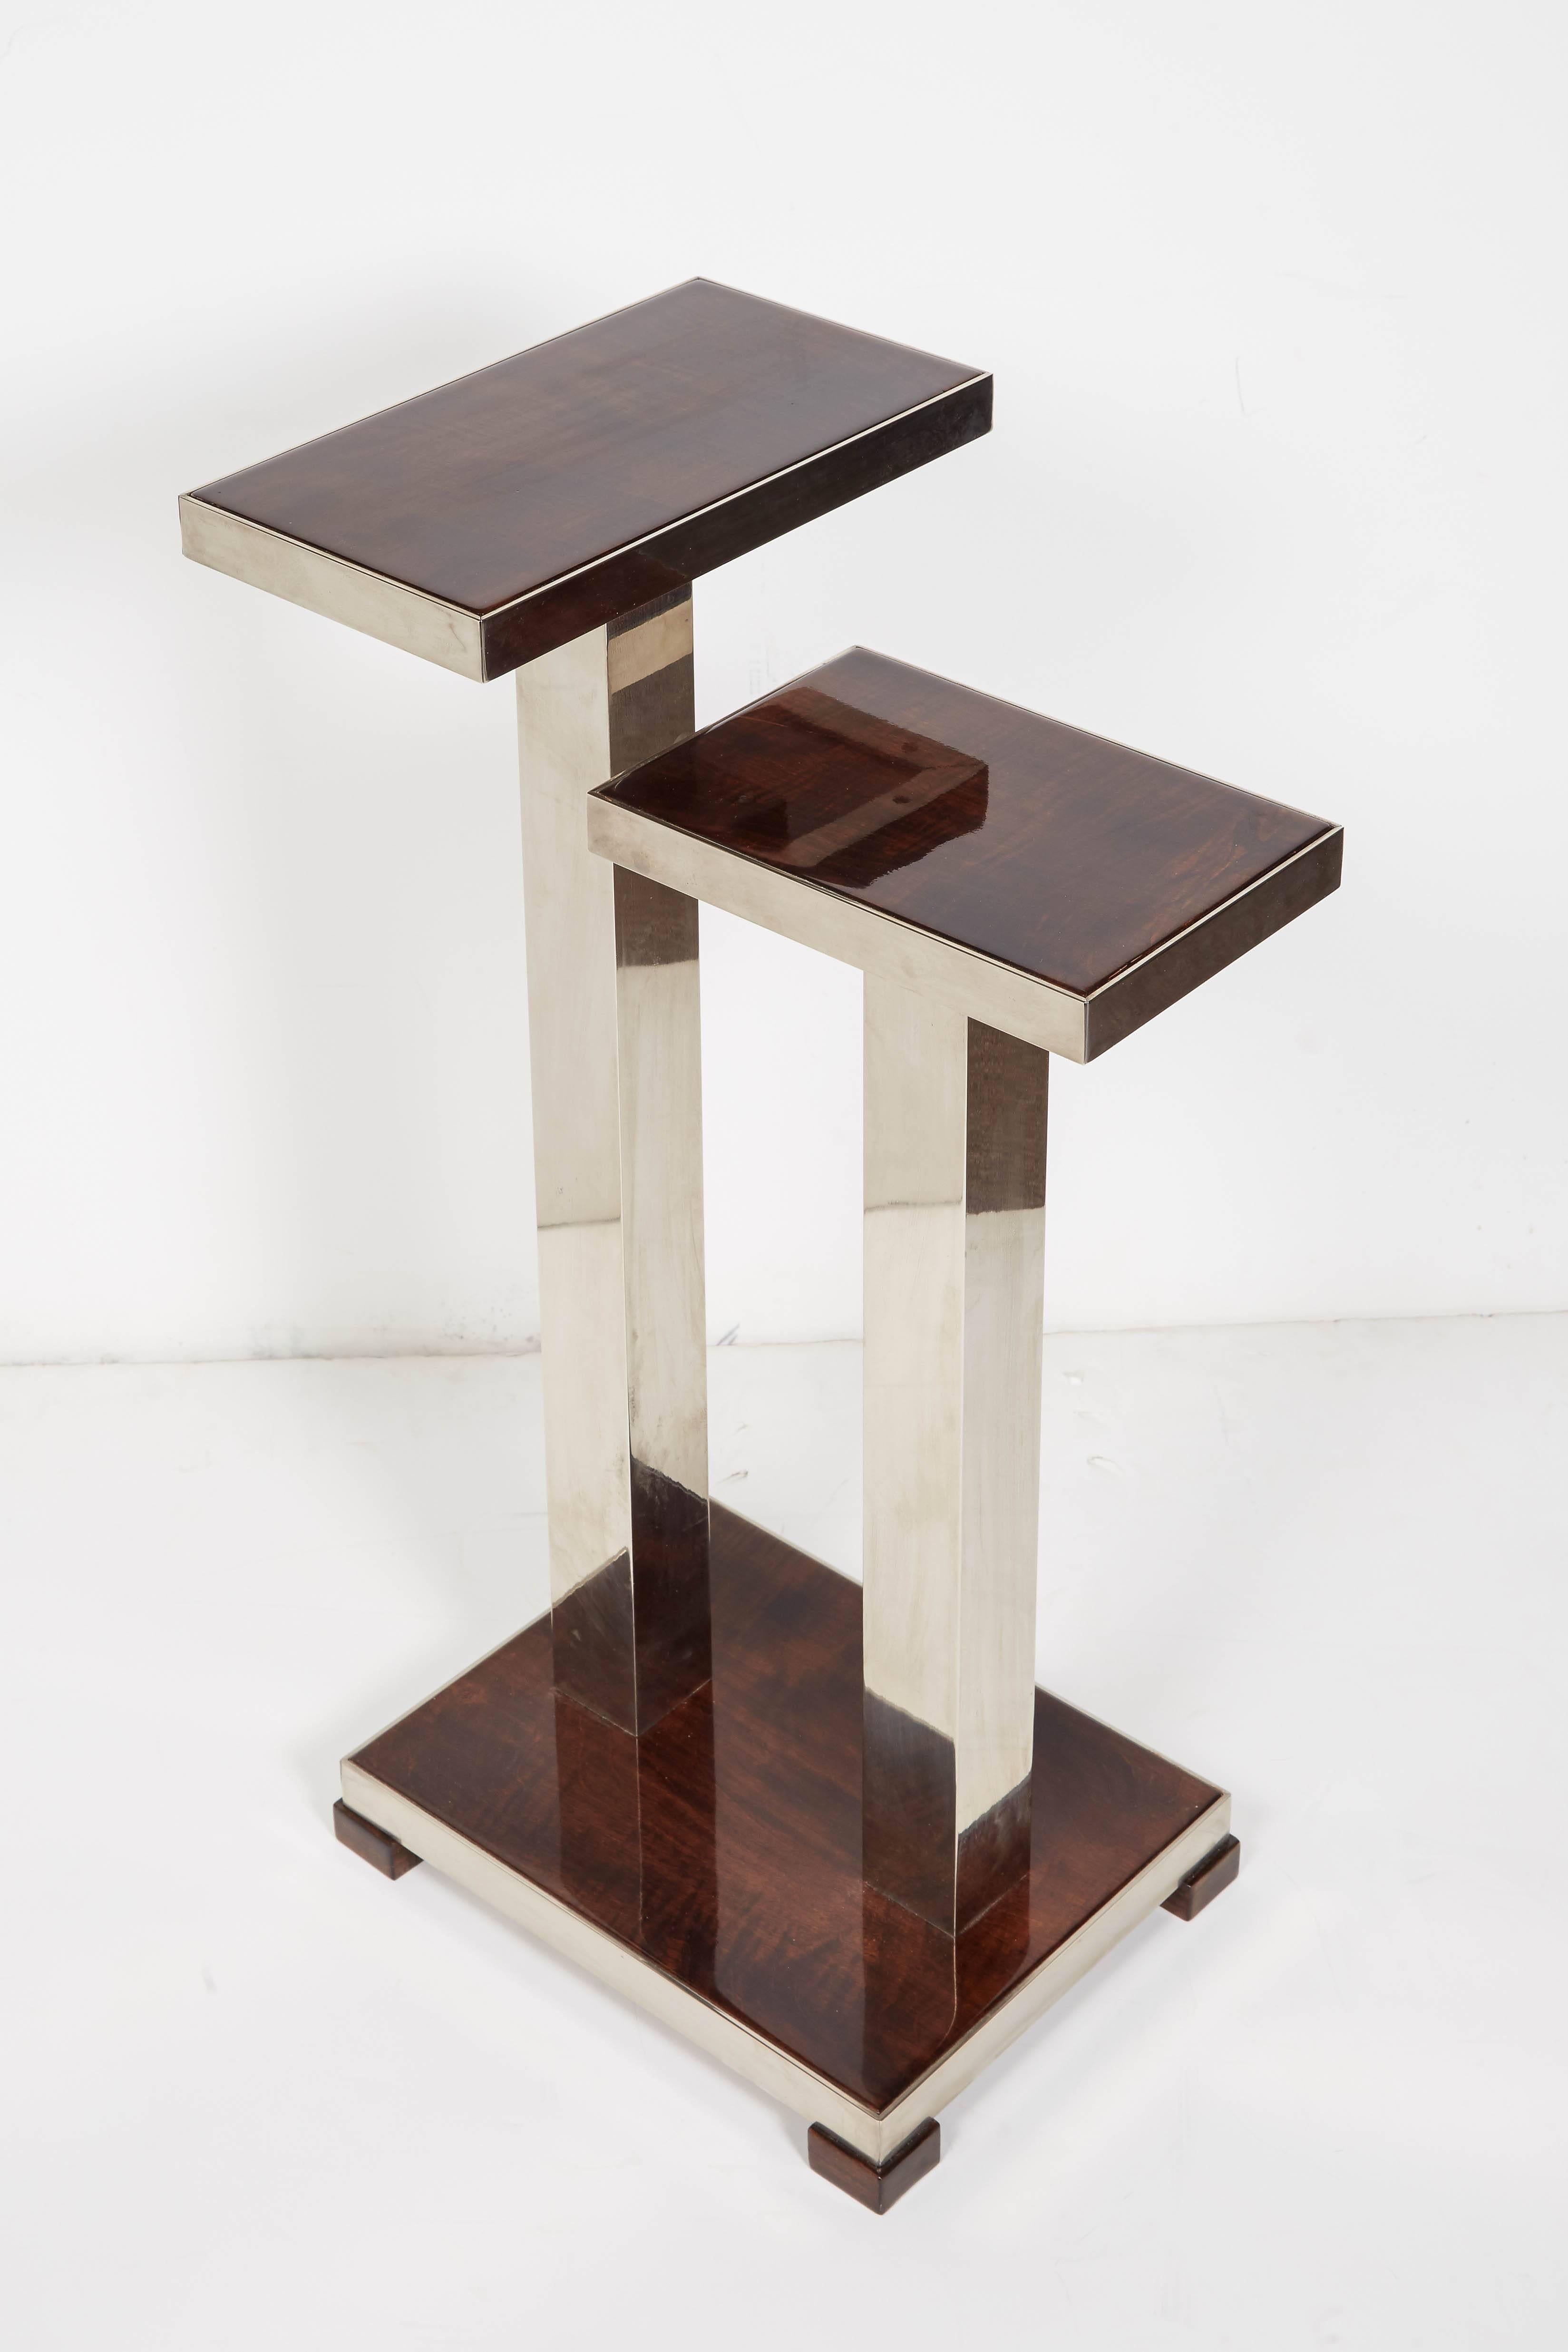 French modernist rectangular, two-tier table with nickeled bronze double tubular base. Architectural in design with cubist lines, this asymmetrical table with shelves at varied heights is fully armored with polished nickeled bronze banding. The